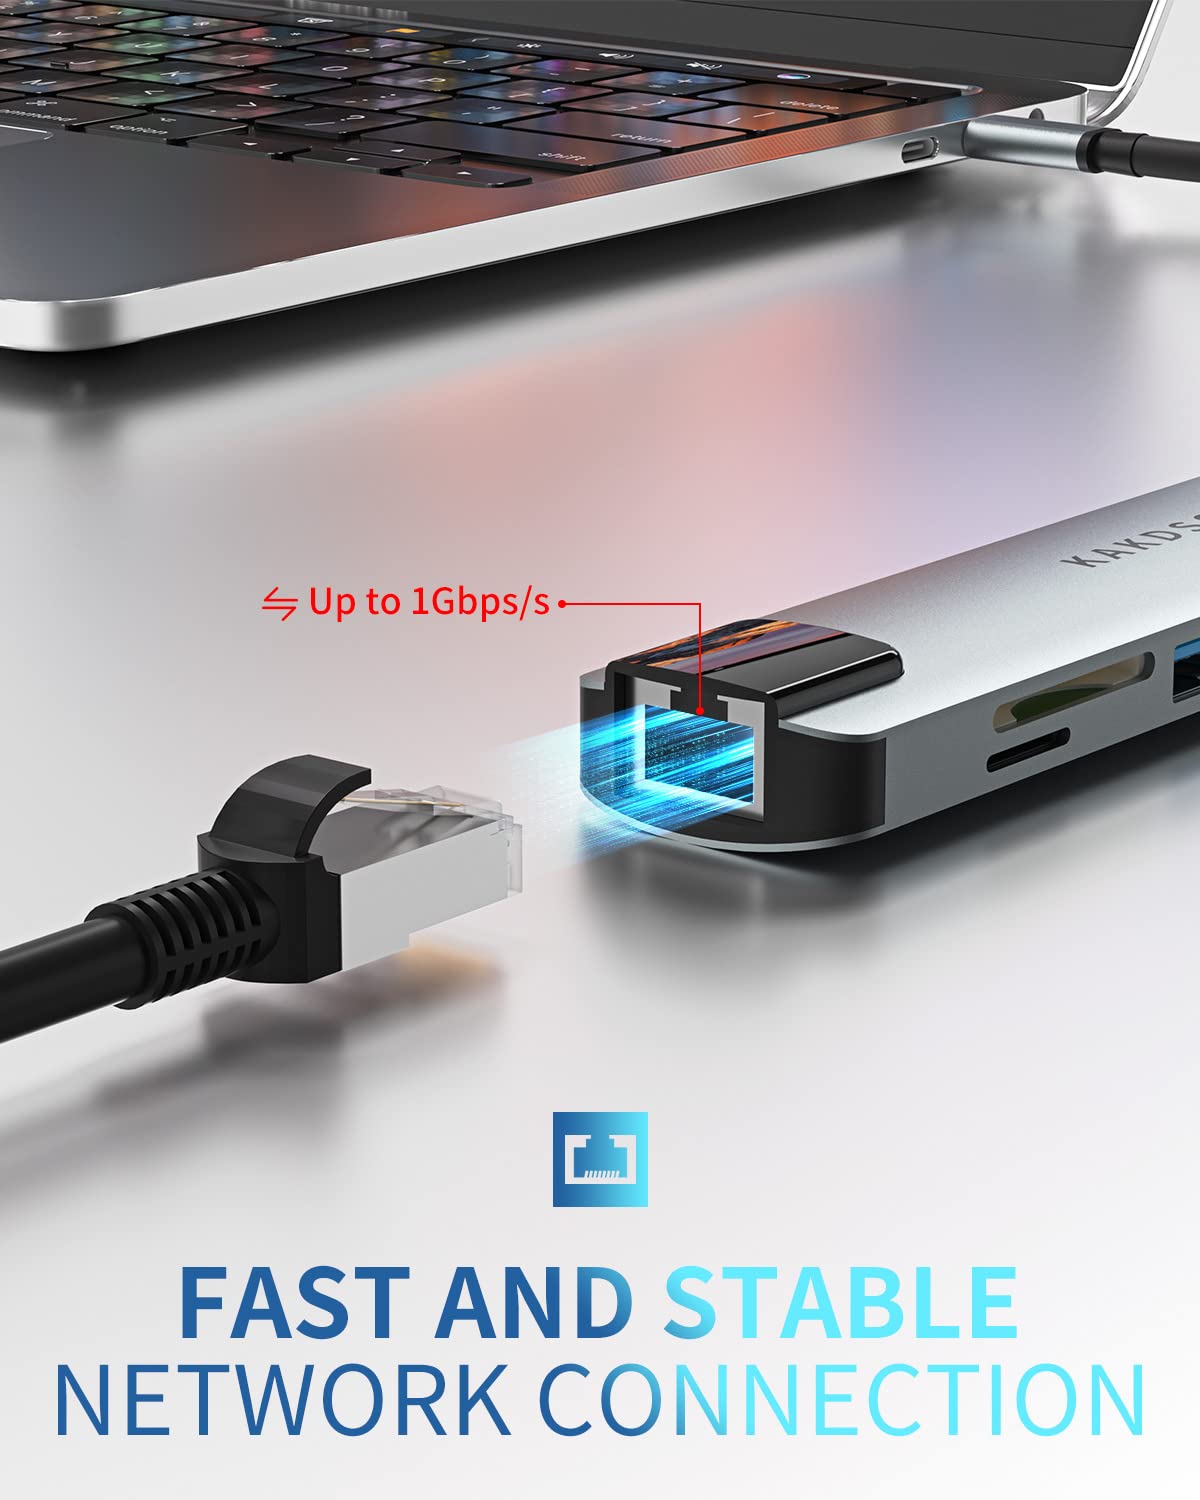 USB C Hub Multiport Adapter, USB C Hub Kakdsoip USB C Dock with 4K@30Hz HDMI, 100W Power Delivery, Ethernet, USB 3.0 Port, TF/SD Card Reader, 1ft Cable, USB-C Hub for MacBook Air/ Pro iPad Dell Google